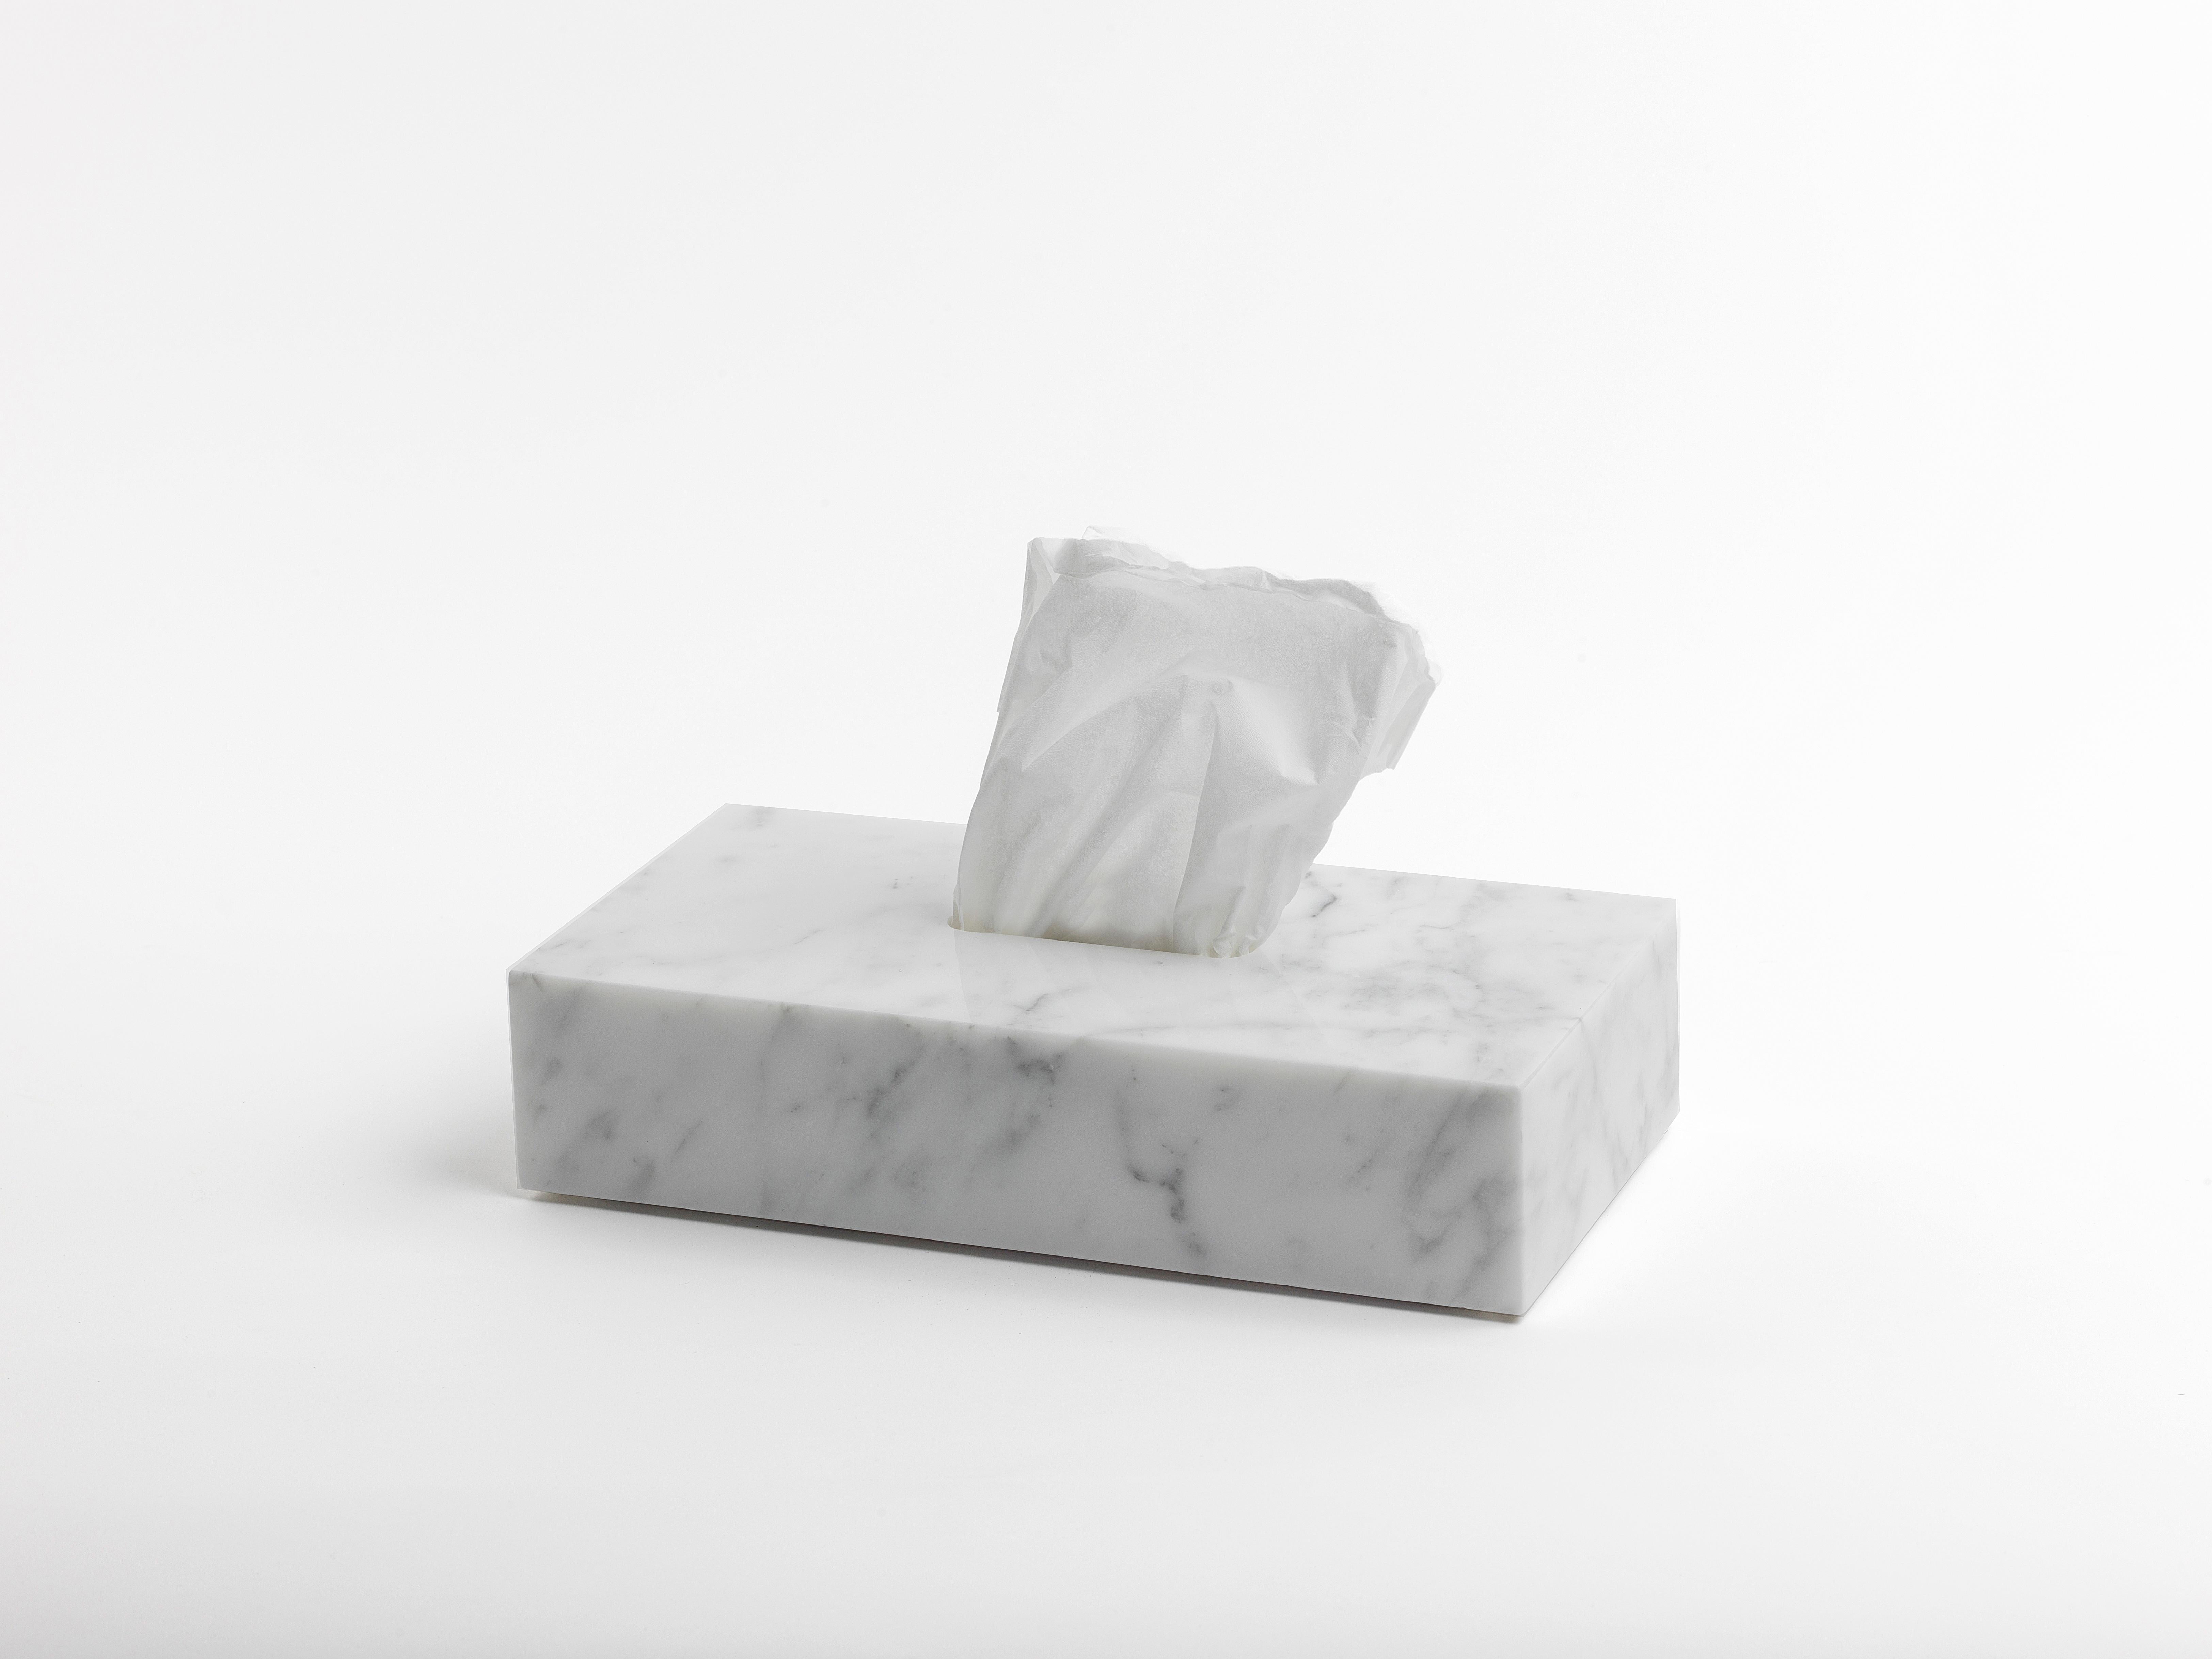 Rectangular tissues cover box in white Carrara marble.
Each piece is in a way unique (since each marble block is different in veins and shades) and handcrafted in Italy. Slight variations in shape, color and size are to be considered a guarantee of